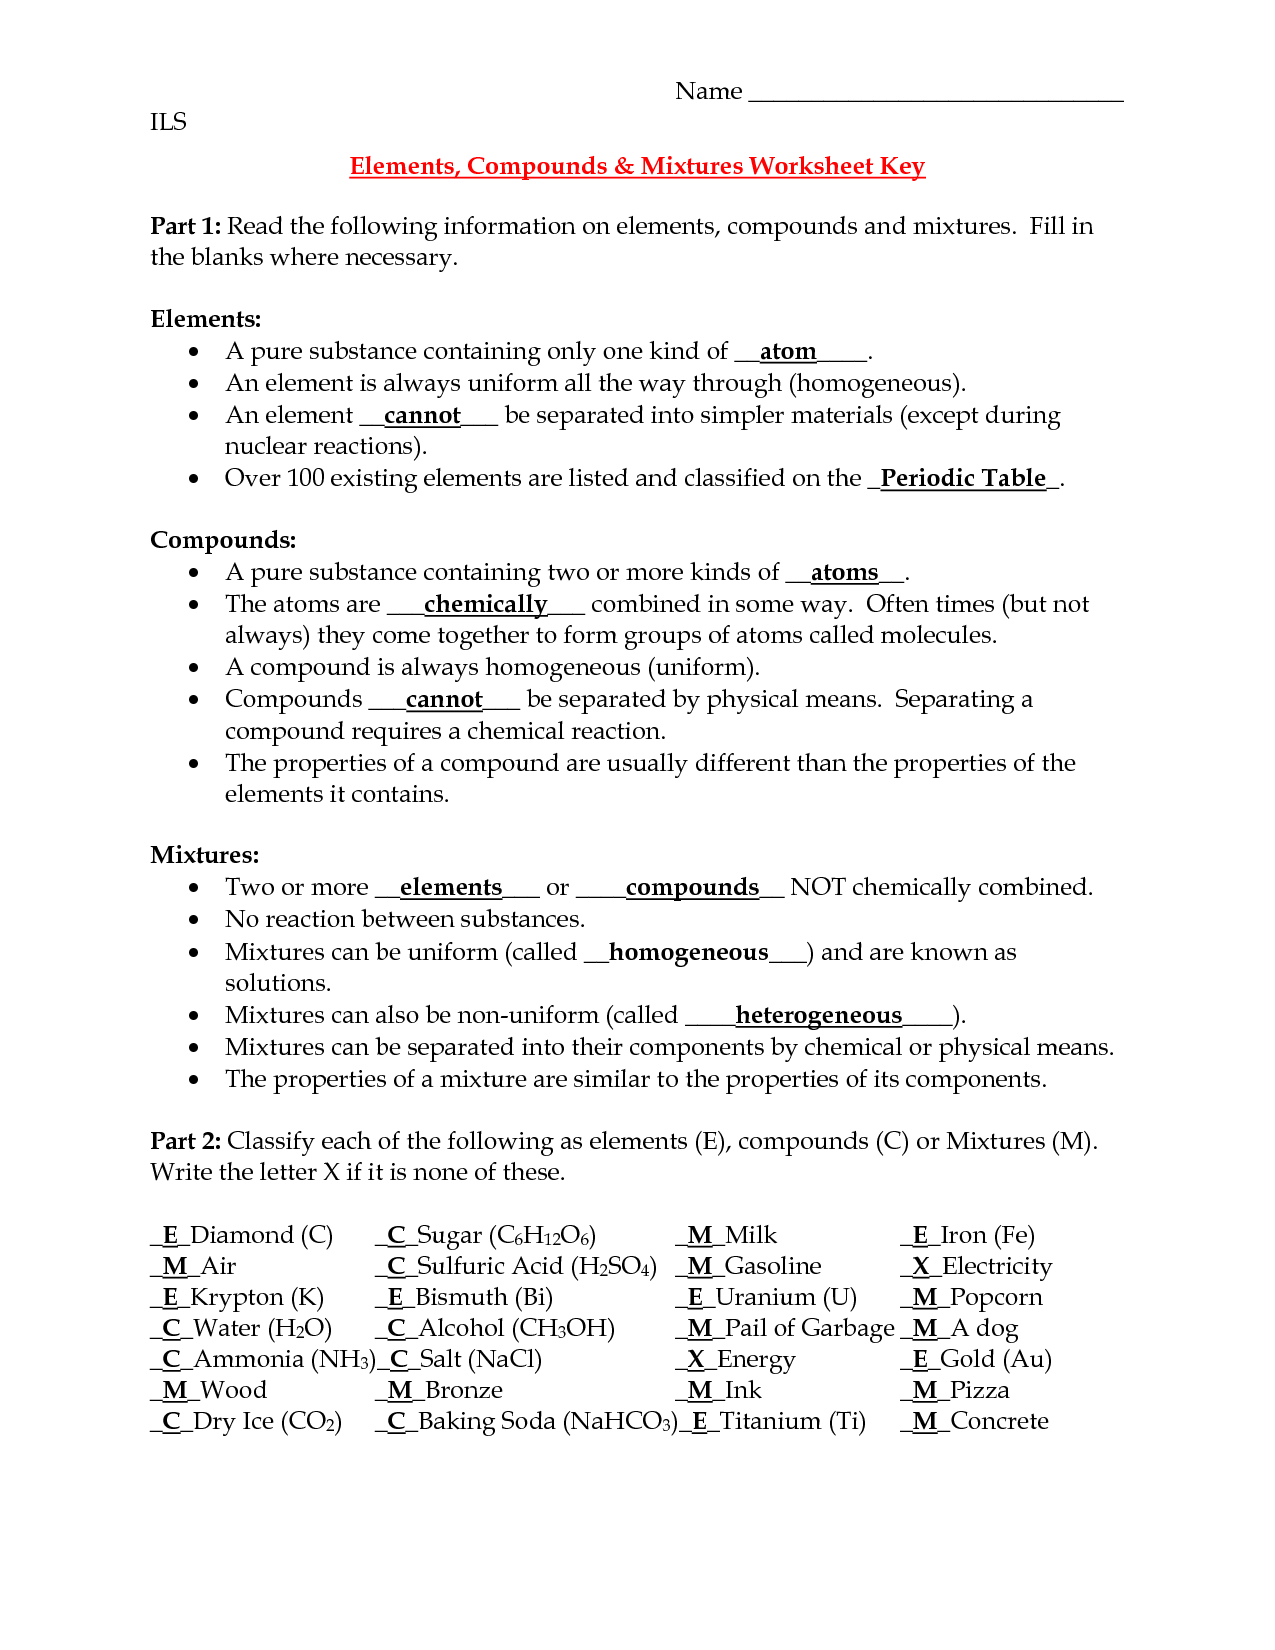 Elements Compounds And Mixtures Worksheet Answers Answer Key